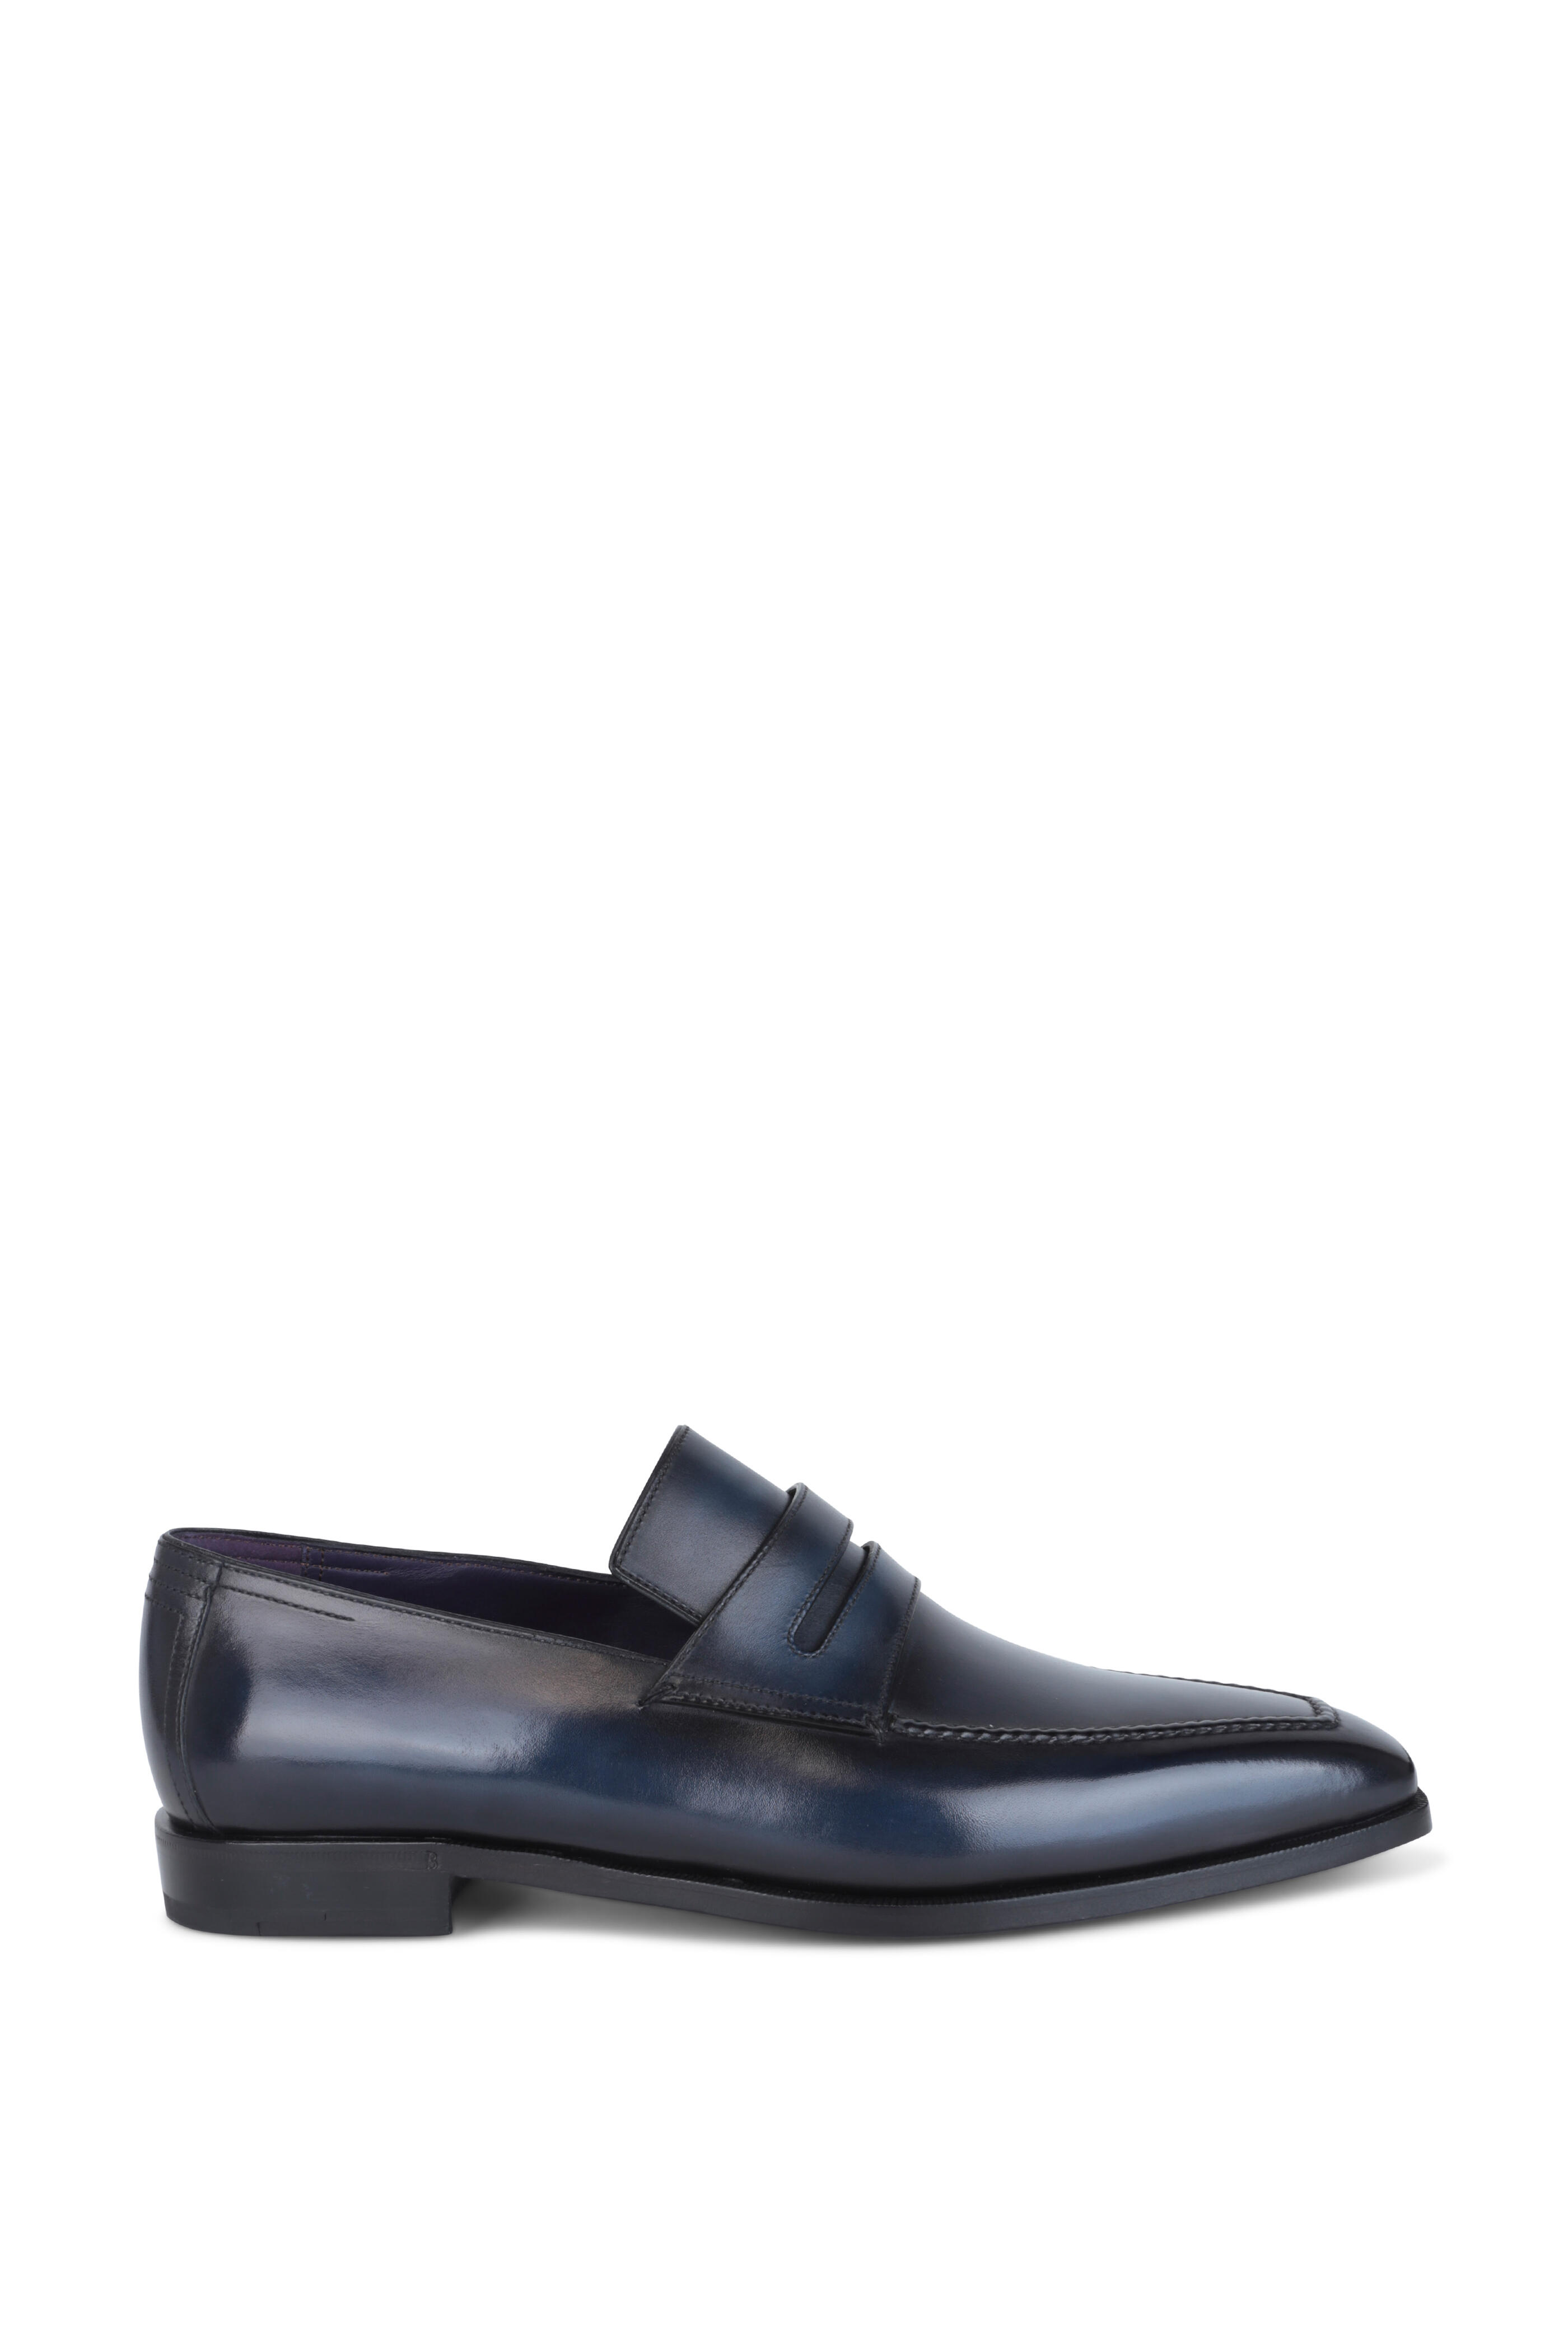 Berluti - Andy Blue Démesure Leather Loafer | Mitchell Stores